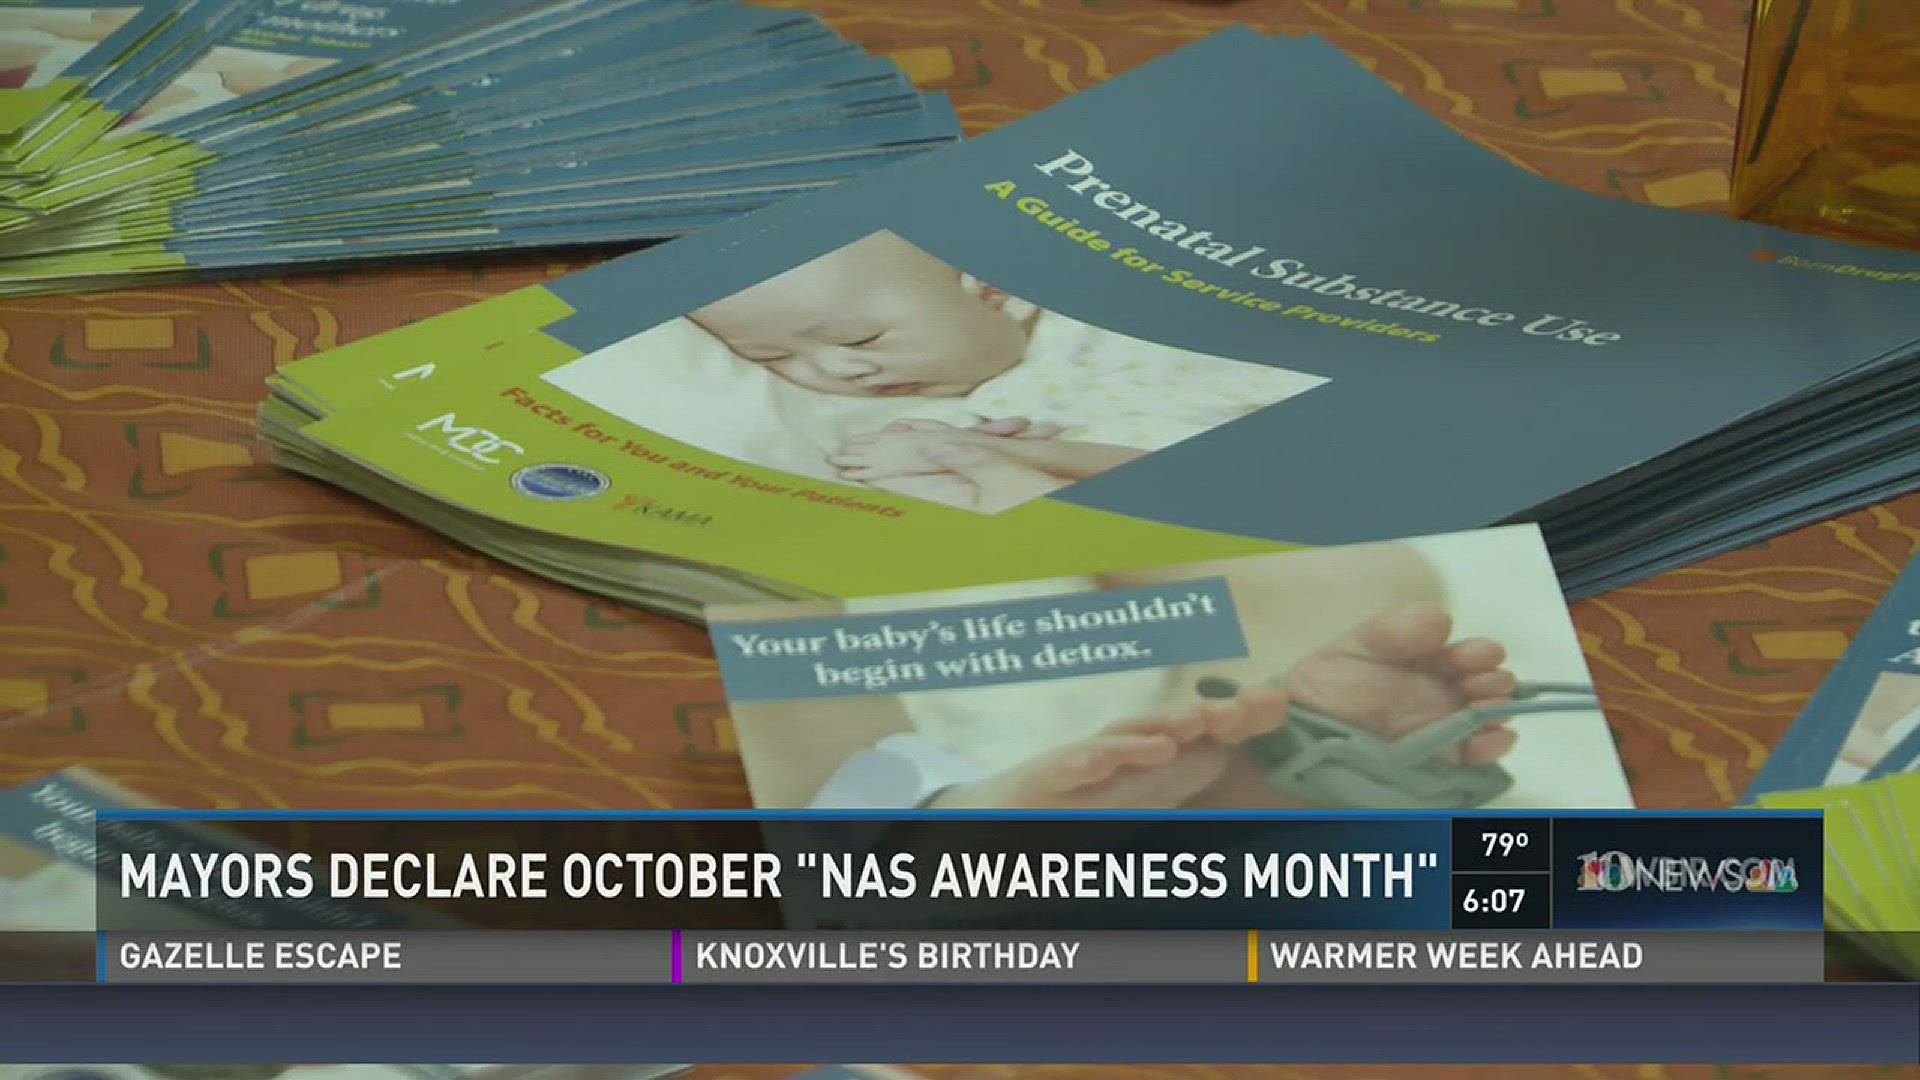 Oct. 3, 2016: Mayors Madeline Rogero and Tim Burchett visited a non-profit that helps new mothers and pregnant women fighting addiction to officially recognize October as Neo-natal Abstinence Syndrome Awareness Month.